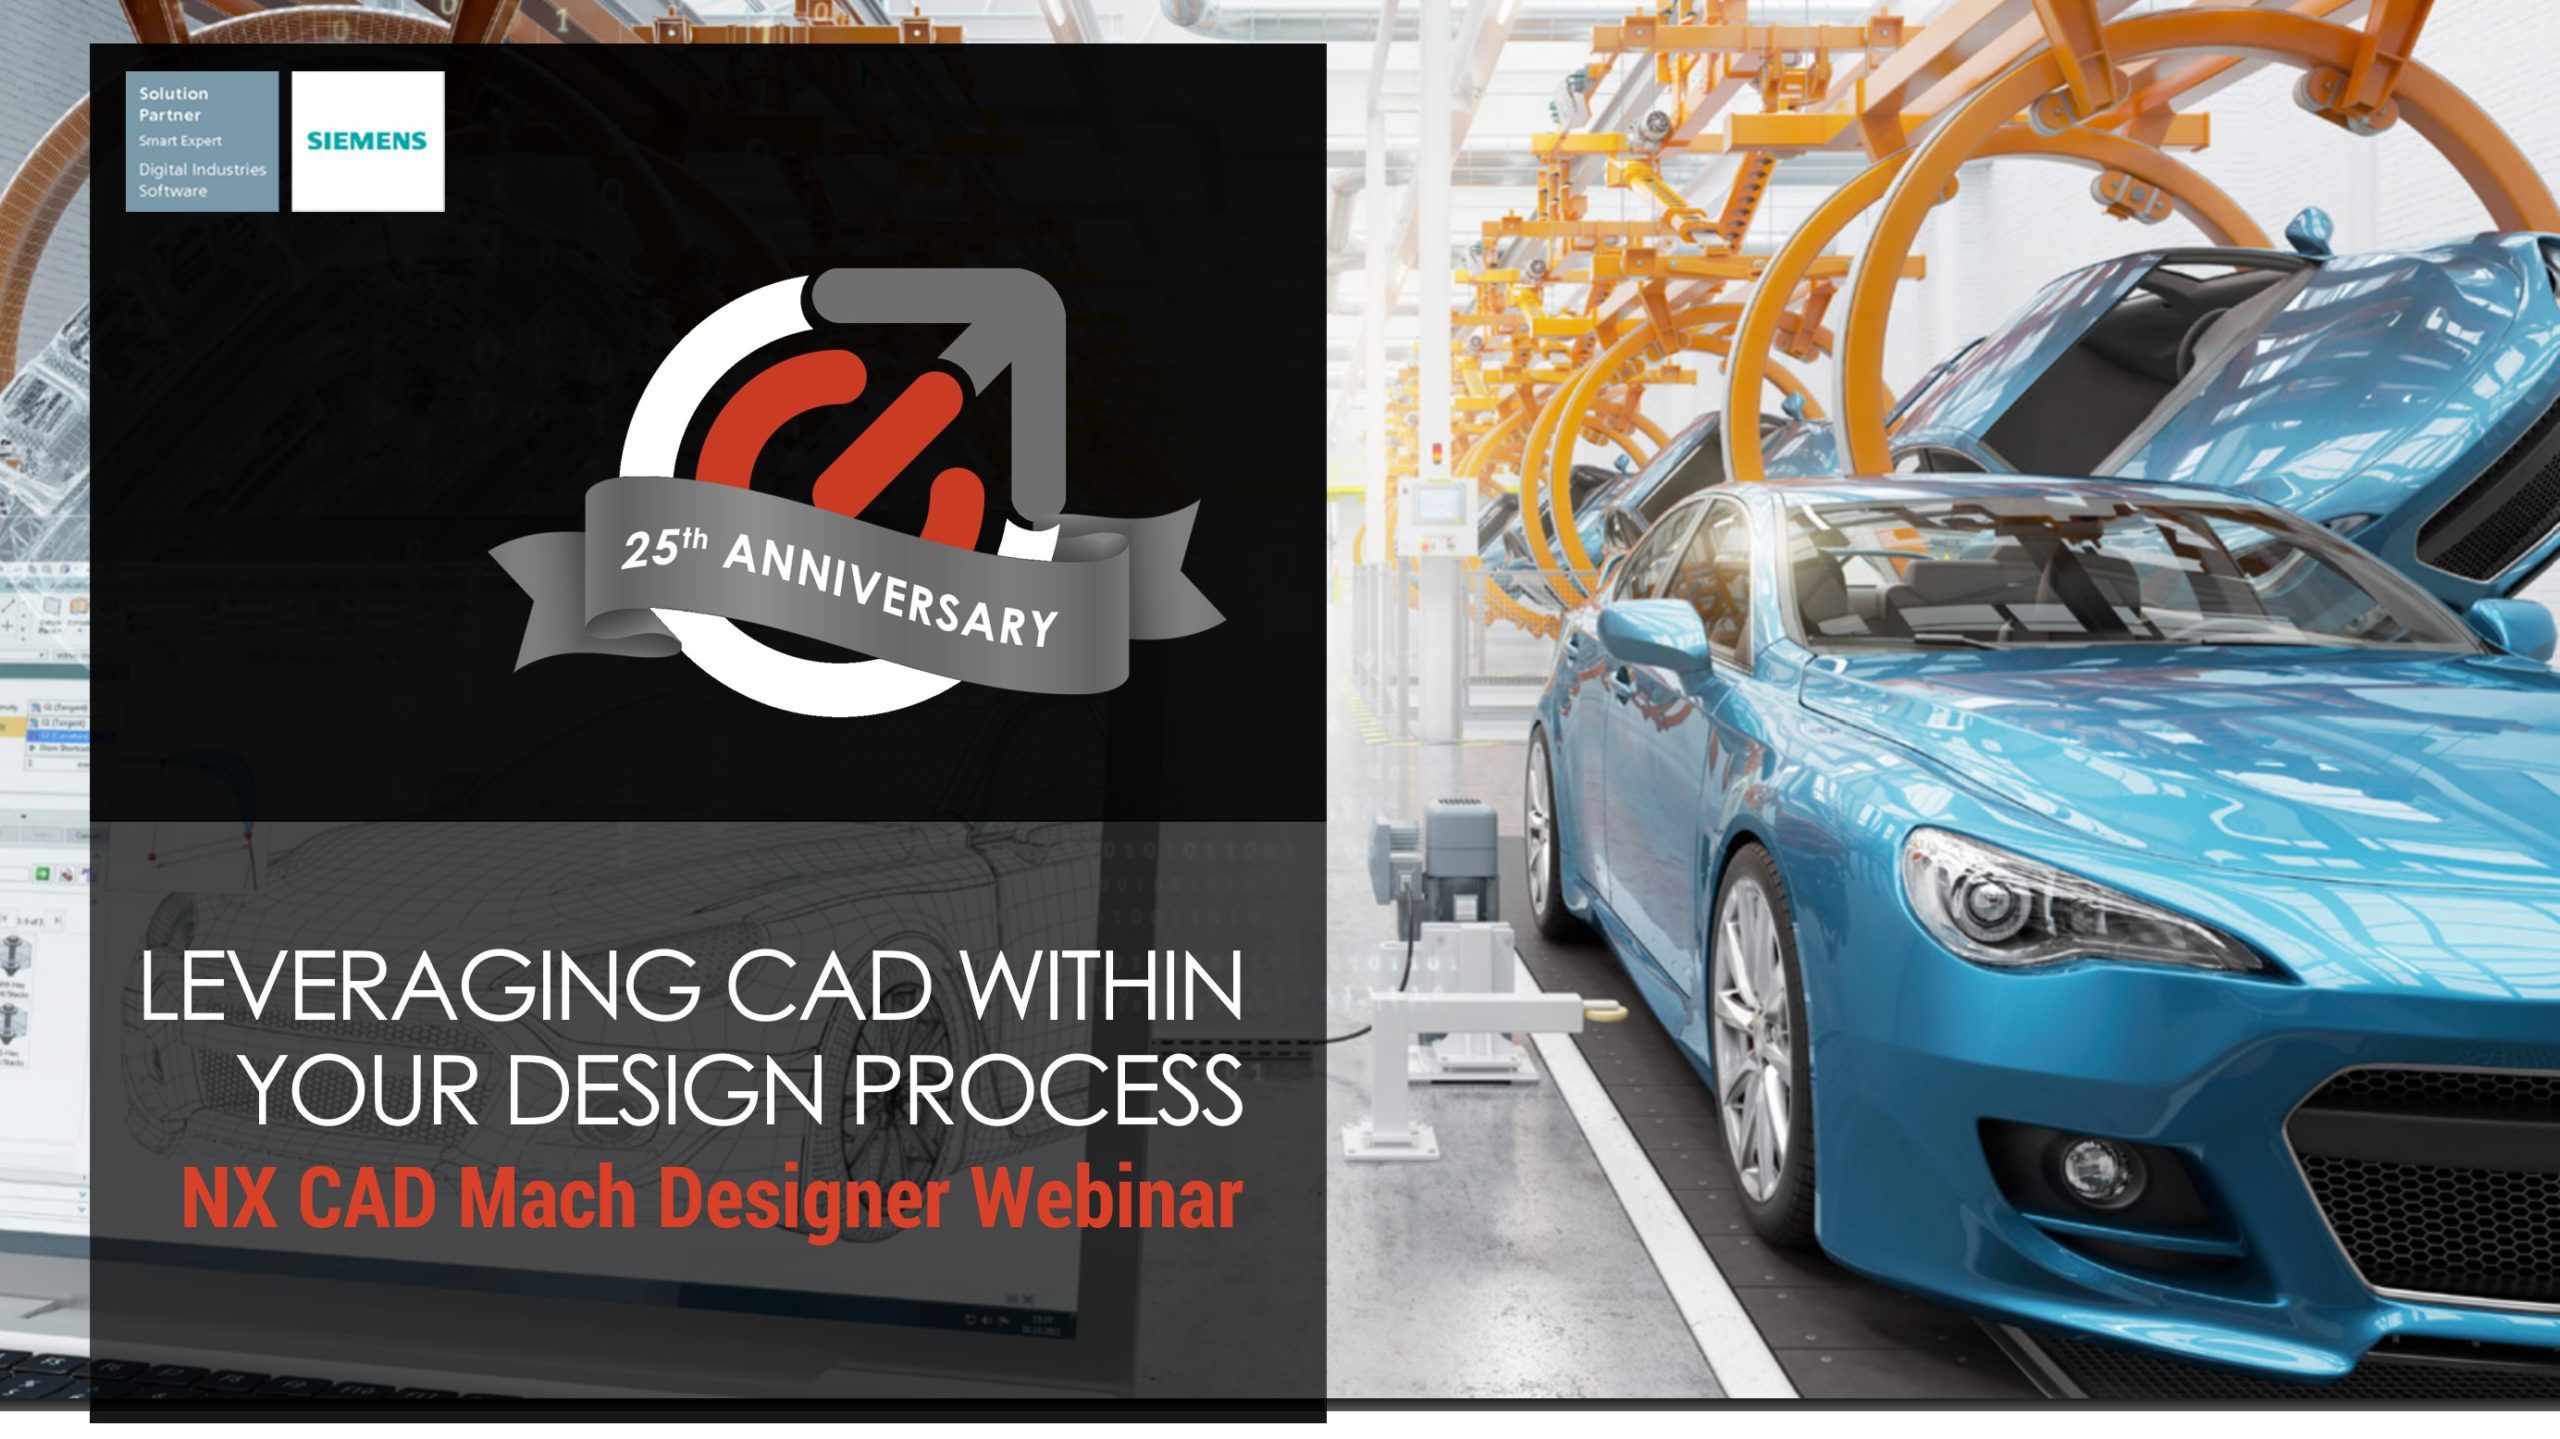 For people looking for an entry-level CAD solution, but think NX is too expensive, or difficult to use, this webinar will show you how you can leverage NX CAD Mach Designer to create and edit designs of typical mechanical components and assemblies, with solid modeling and drafting, basic freeform modeling and sheet metal design.